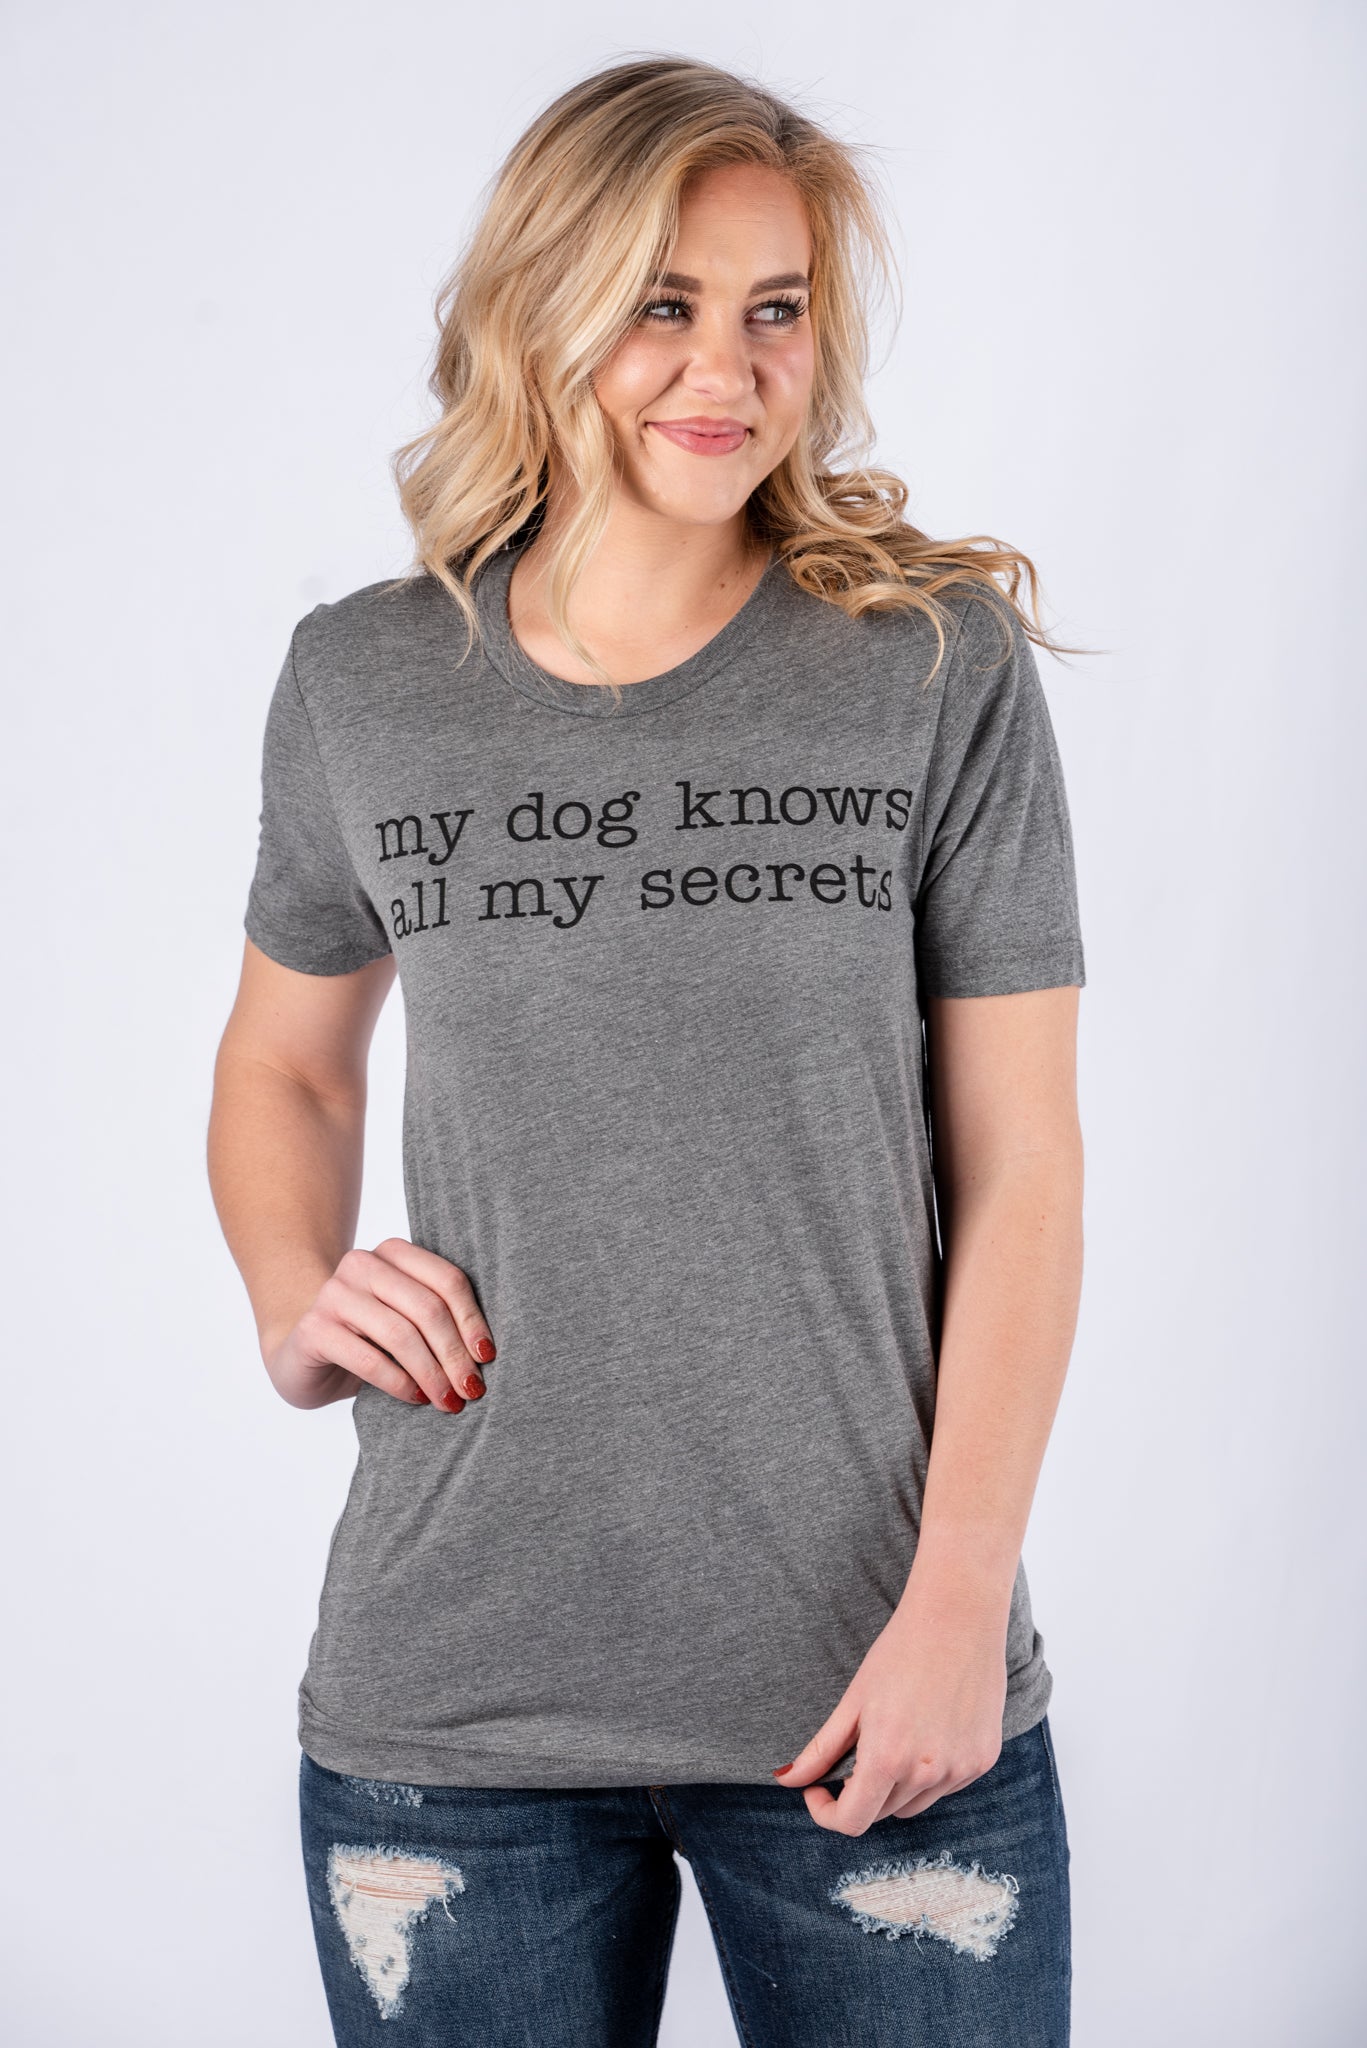 My dog knows all my secrets unisex short sleeve t-shirt grey - Cute T-shirts - Funny T-Shirts at Lush Fashion Lounge Boutique in Oklahoma City